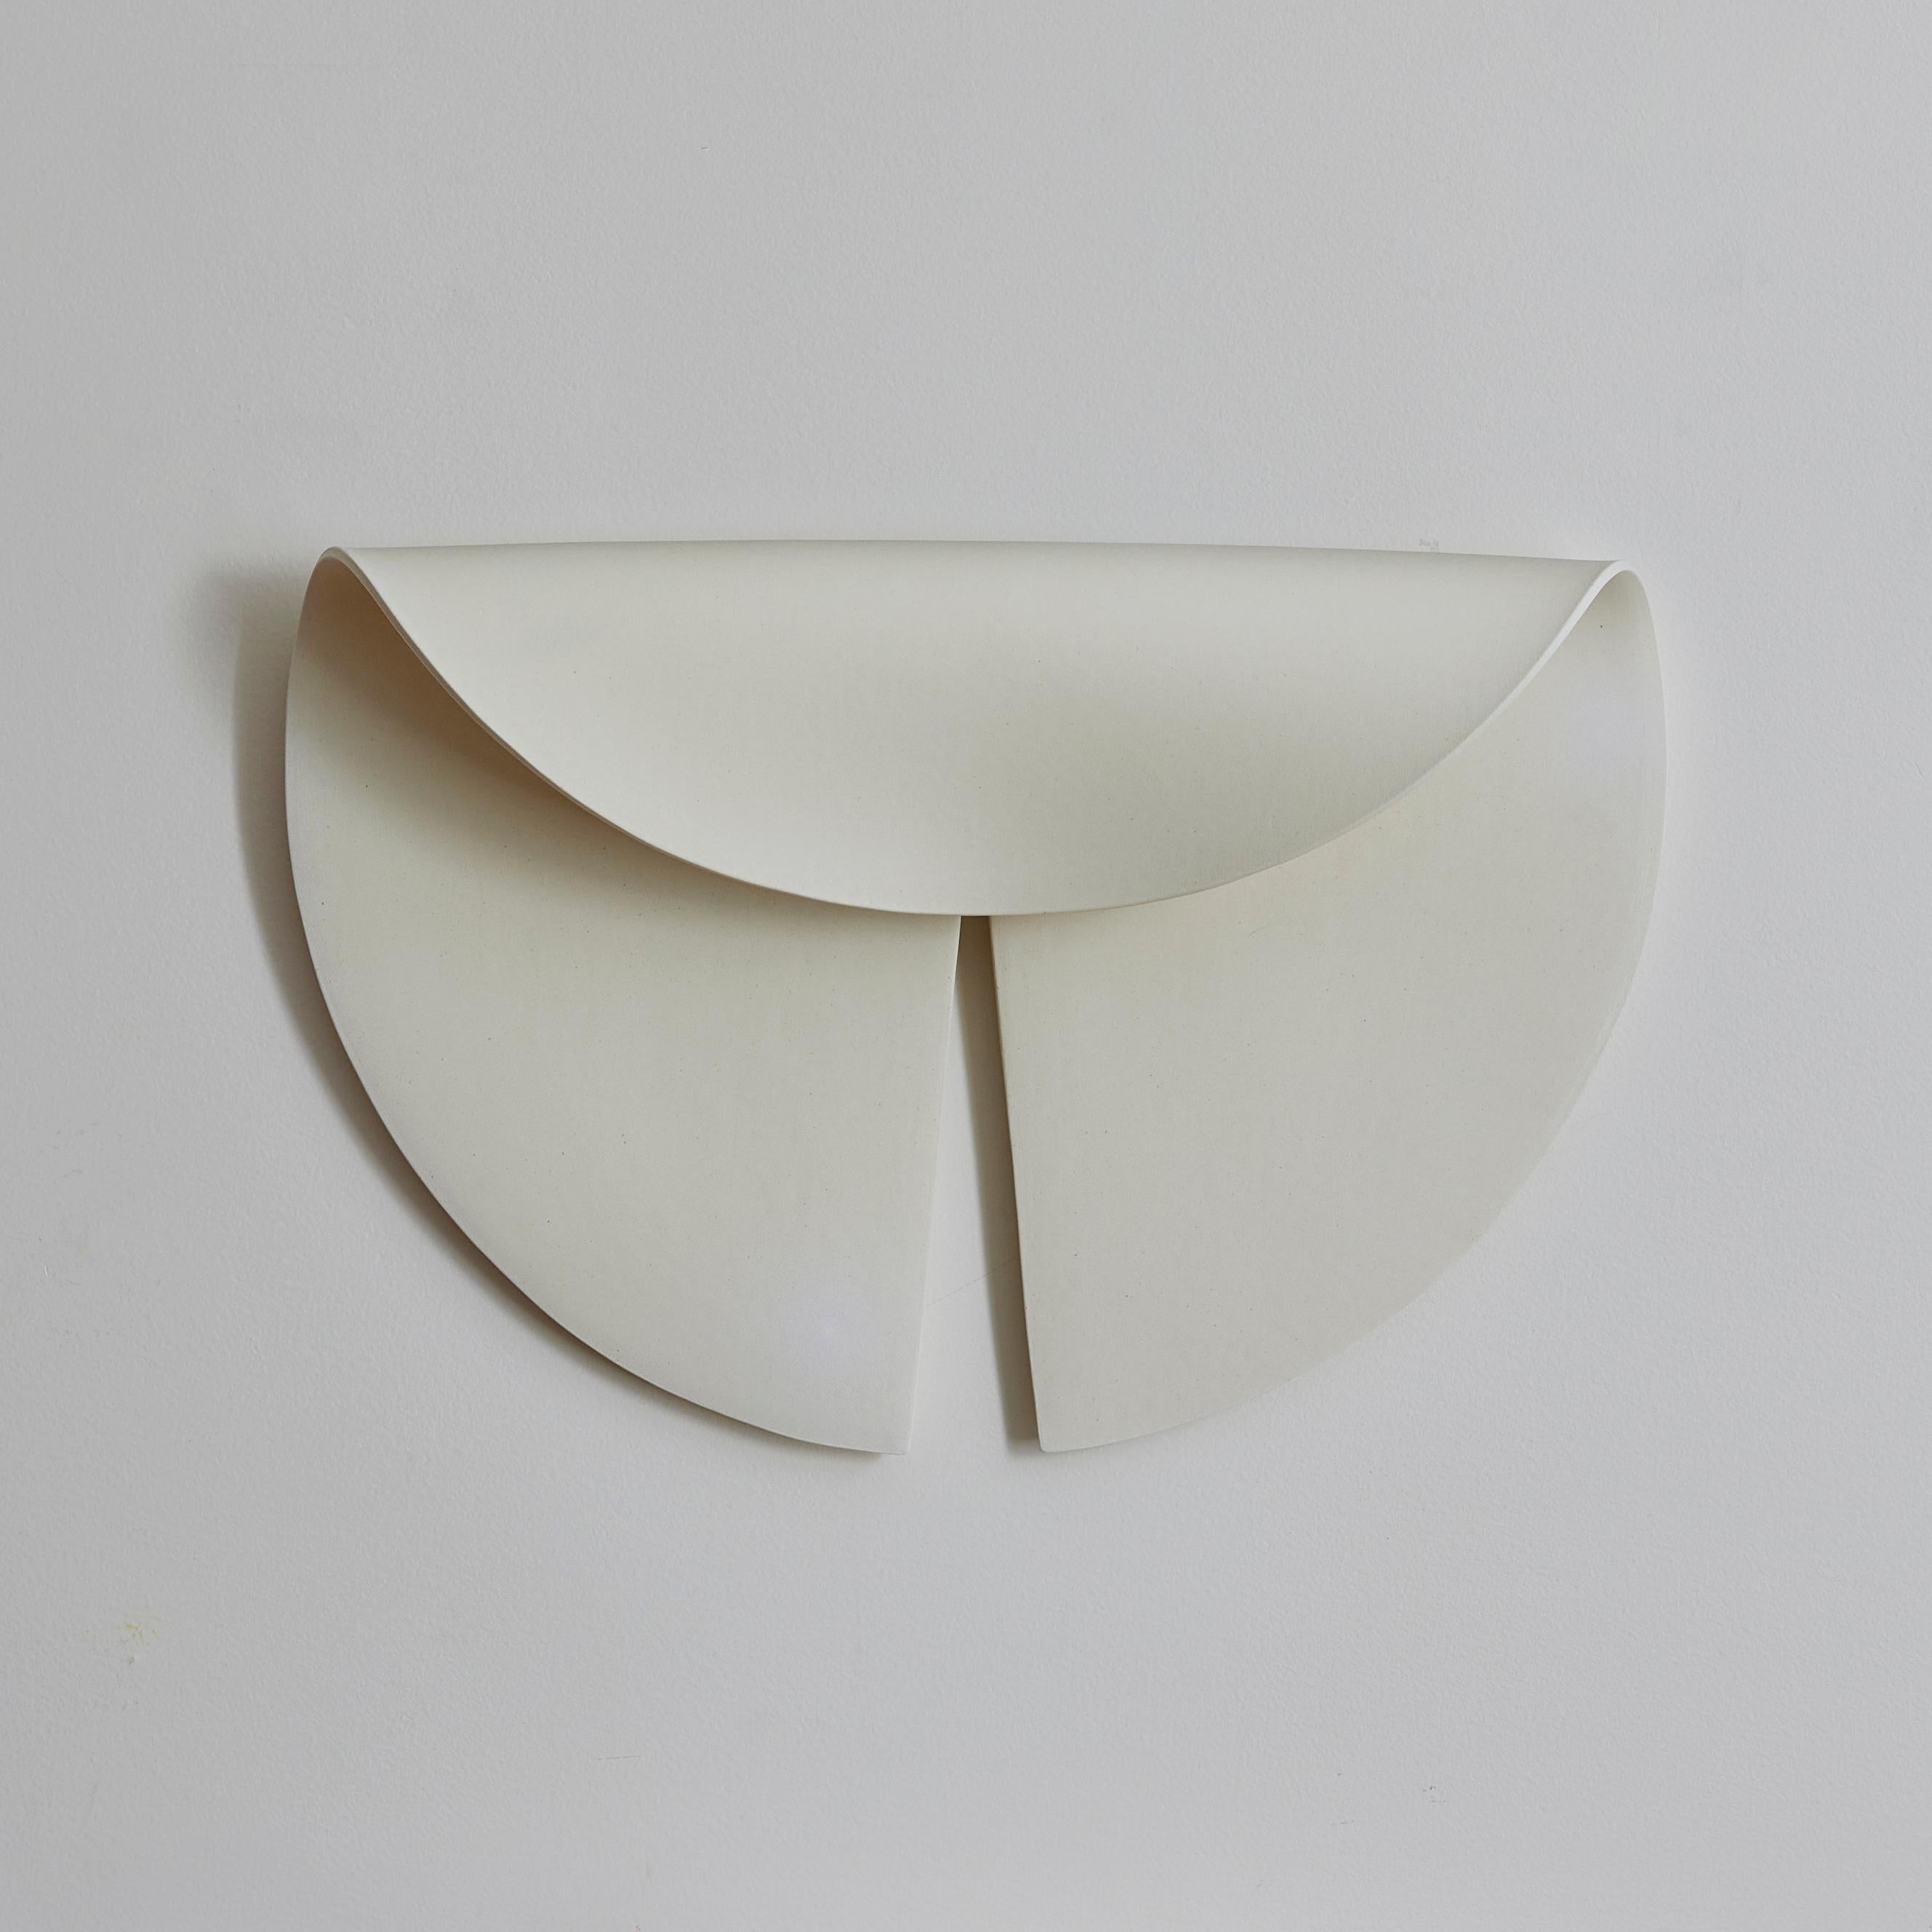 Illuminated Leaf is a ceramic wall sculpture and sconce made by Olivia Barry by Hand. The folded shape of the white earthenware shape hides the light source while allowing the ambient light to project onto the piece. 

Hardwired for US 120 V.